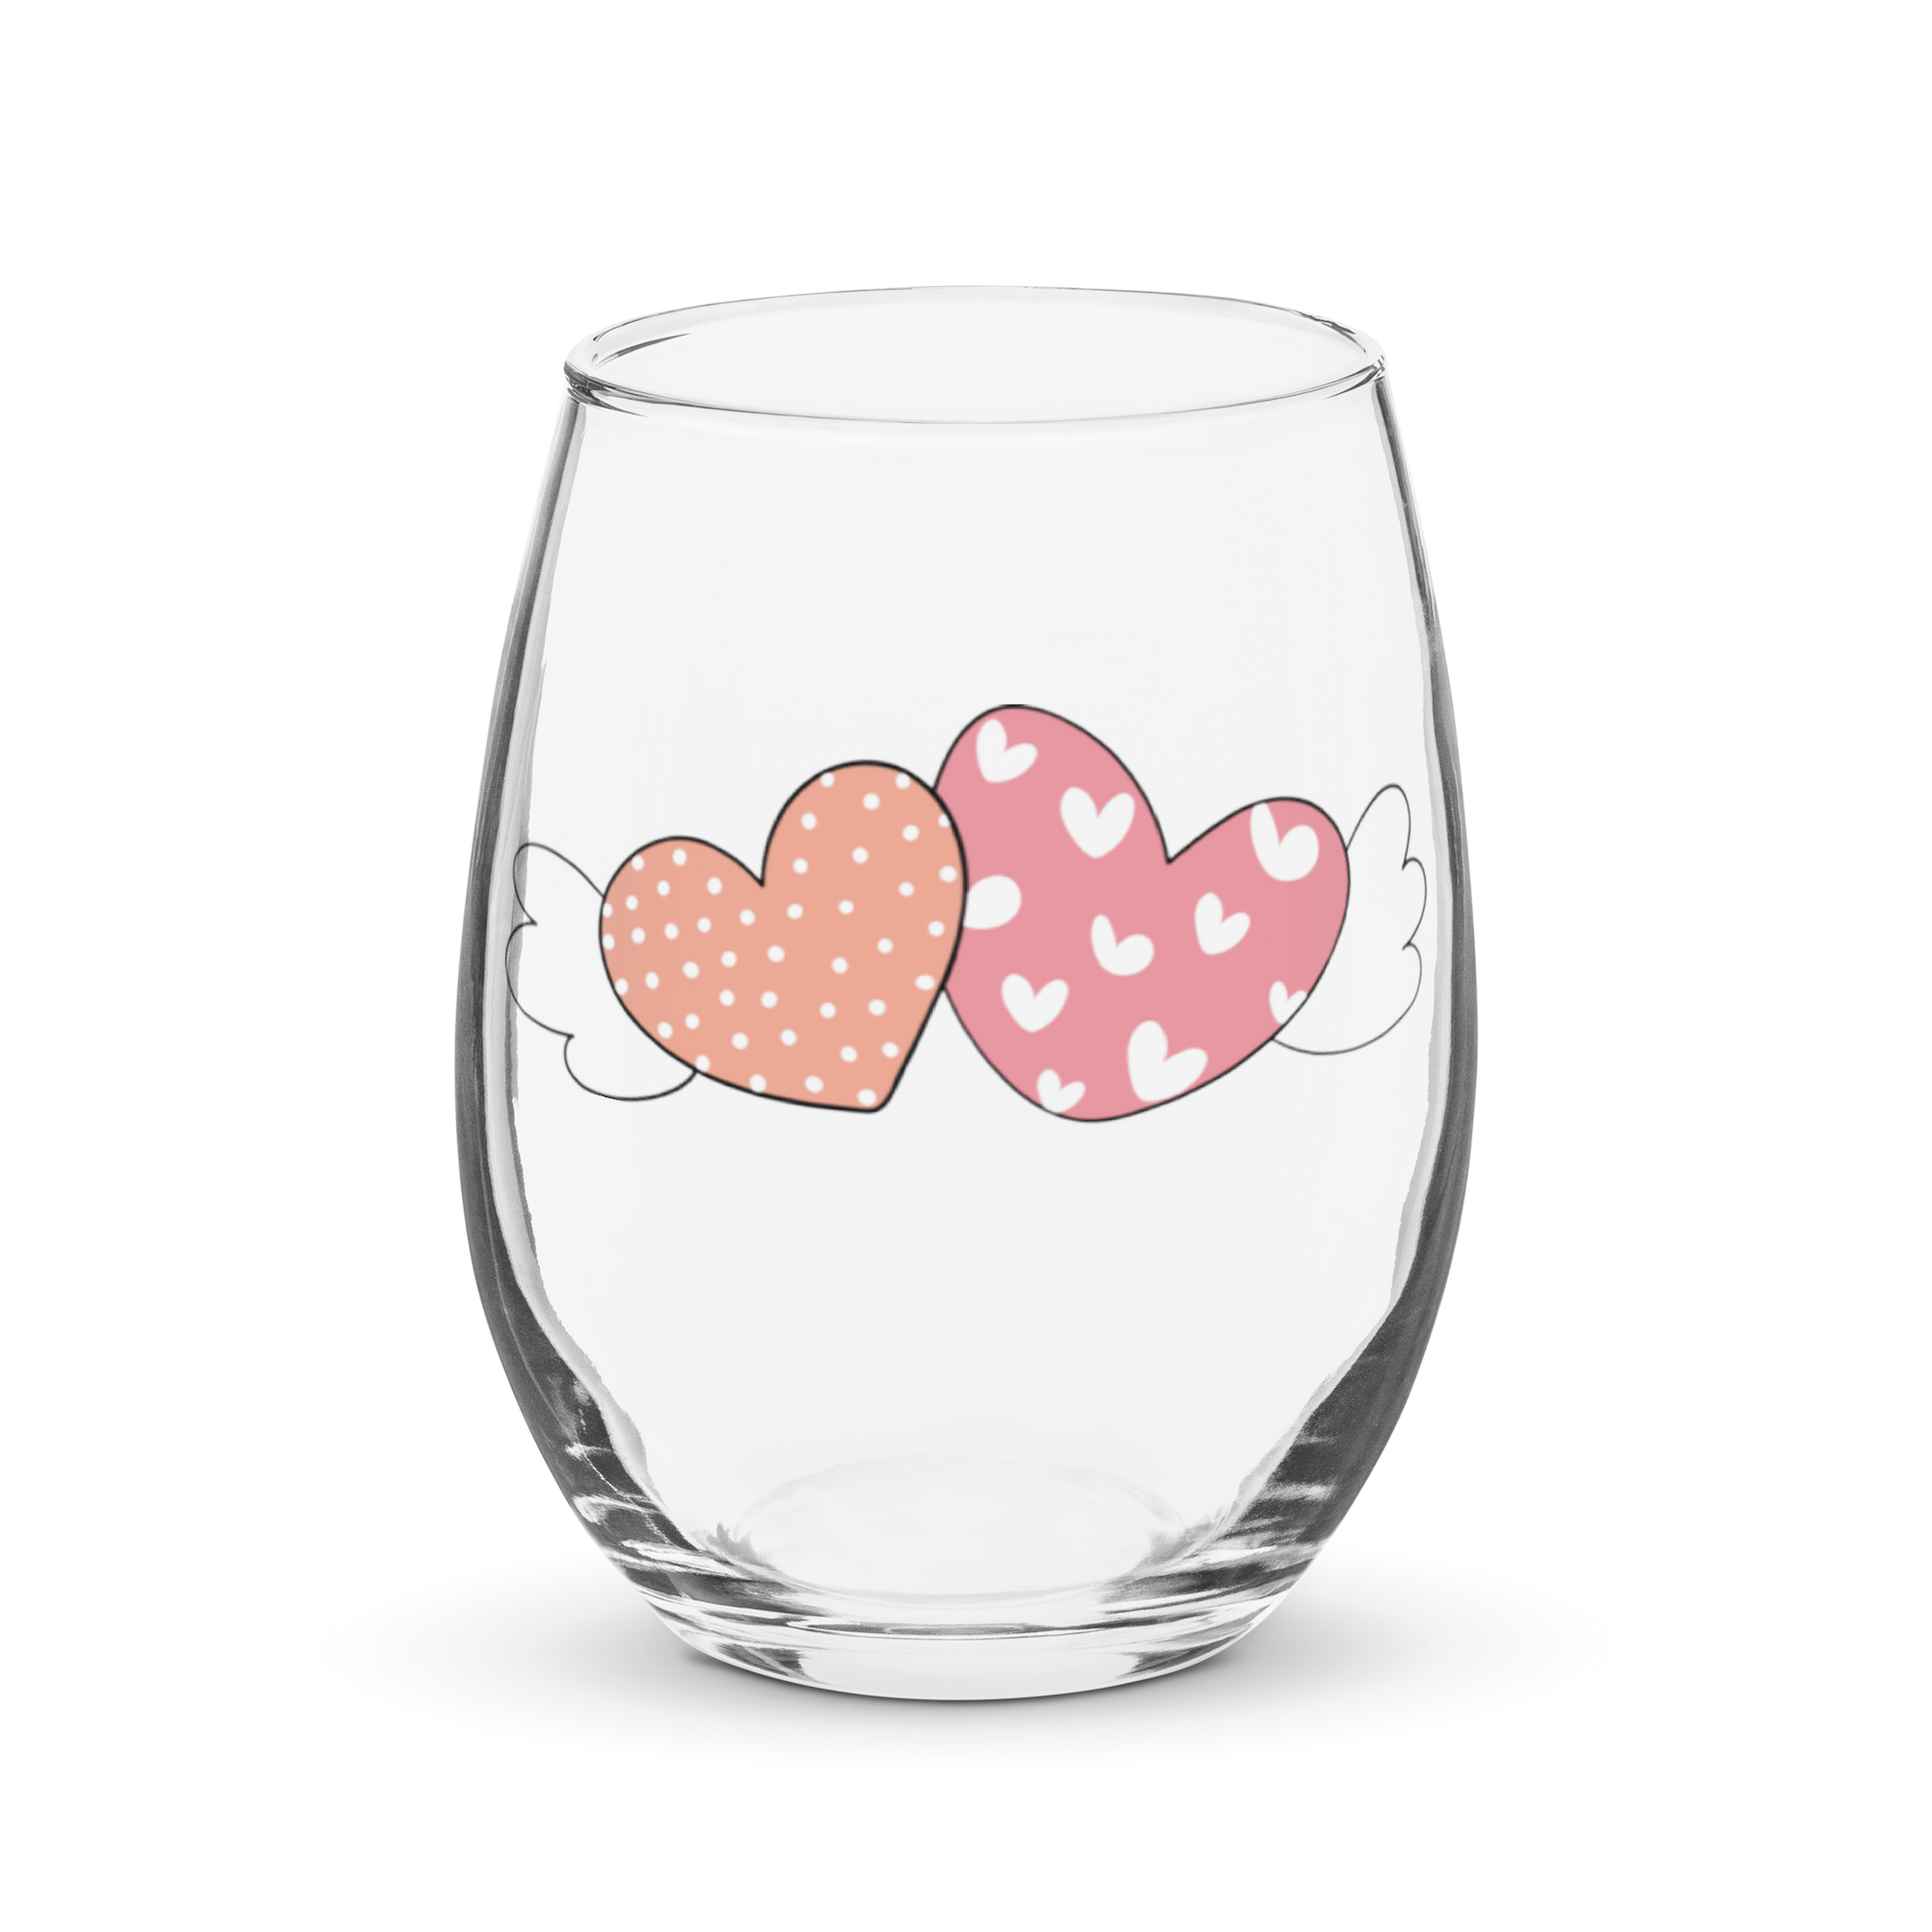 Fluttering Hearts Valentine's Stemless Wine Glass – Lovey Dovey Gnomies Collection - Expressive DeZien 